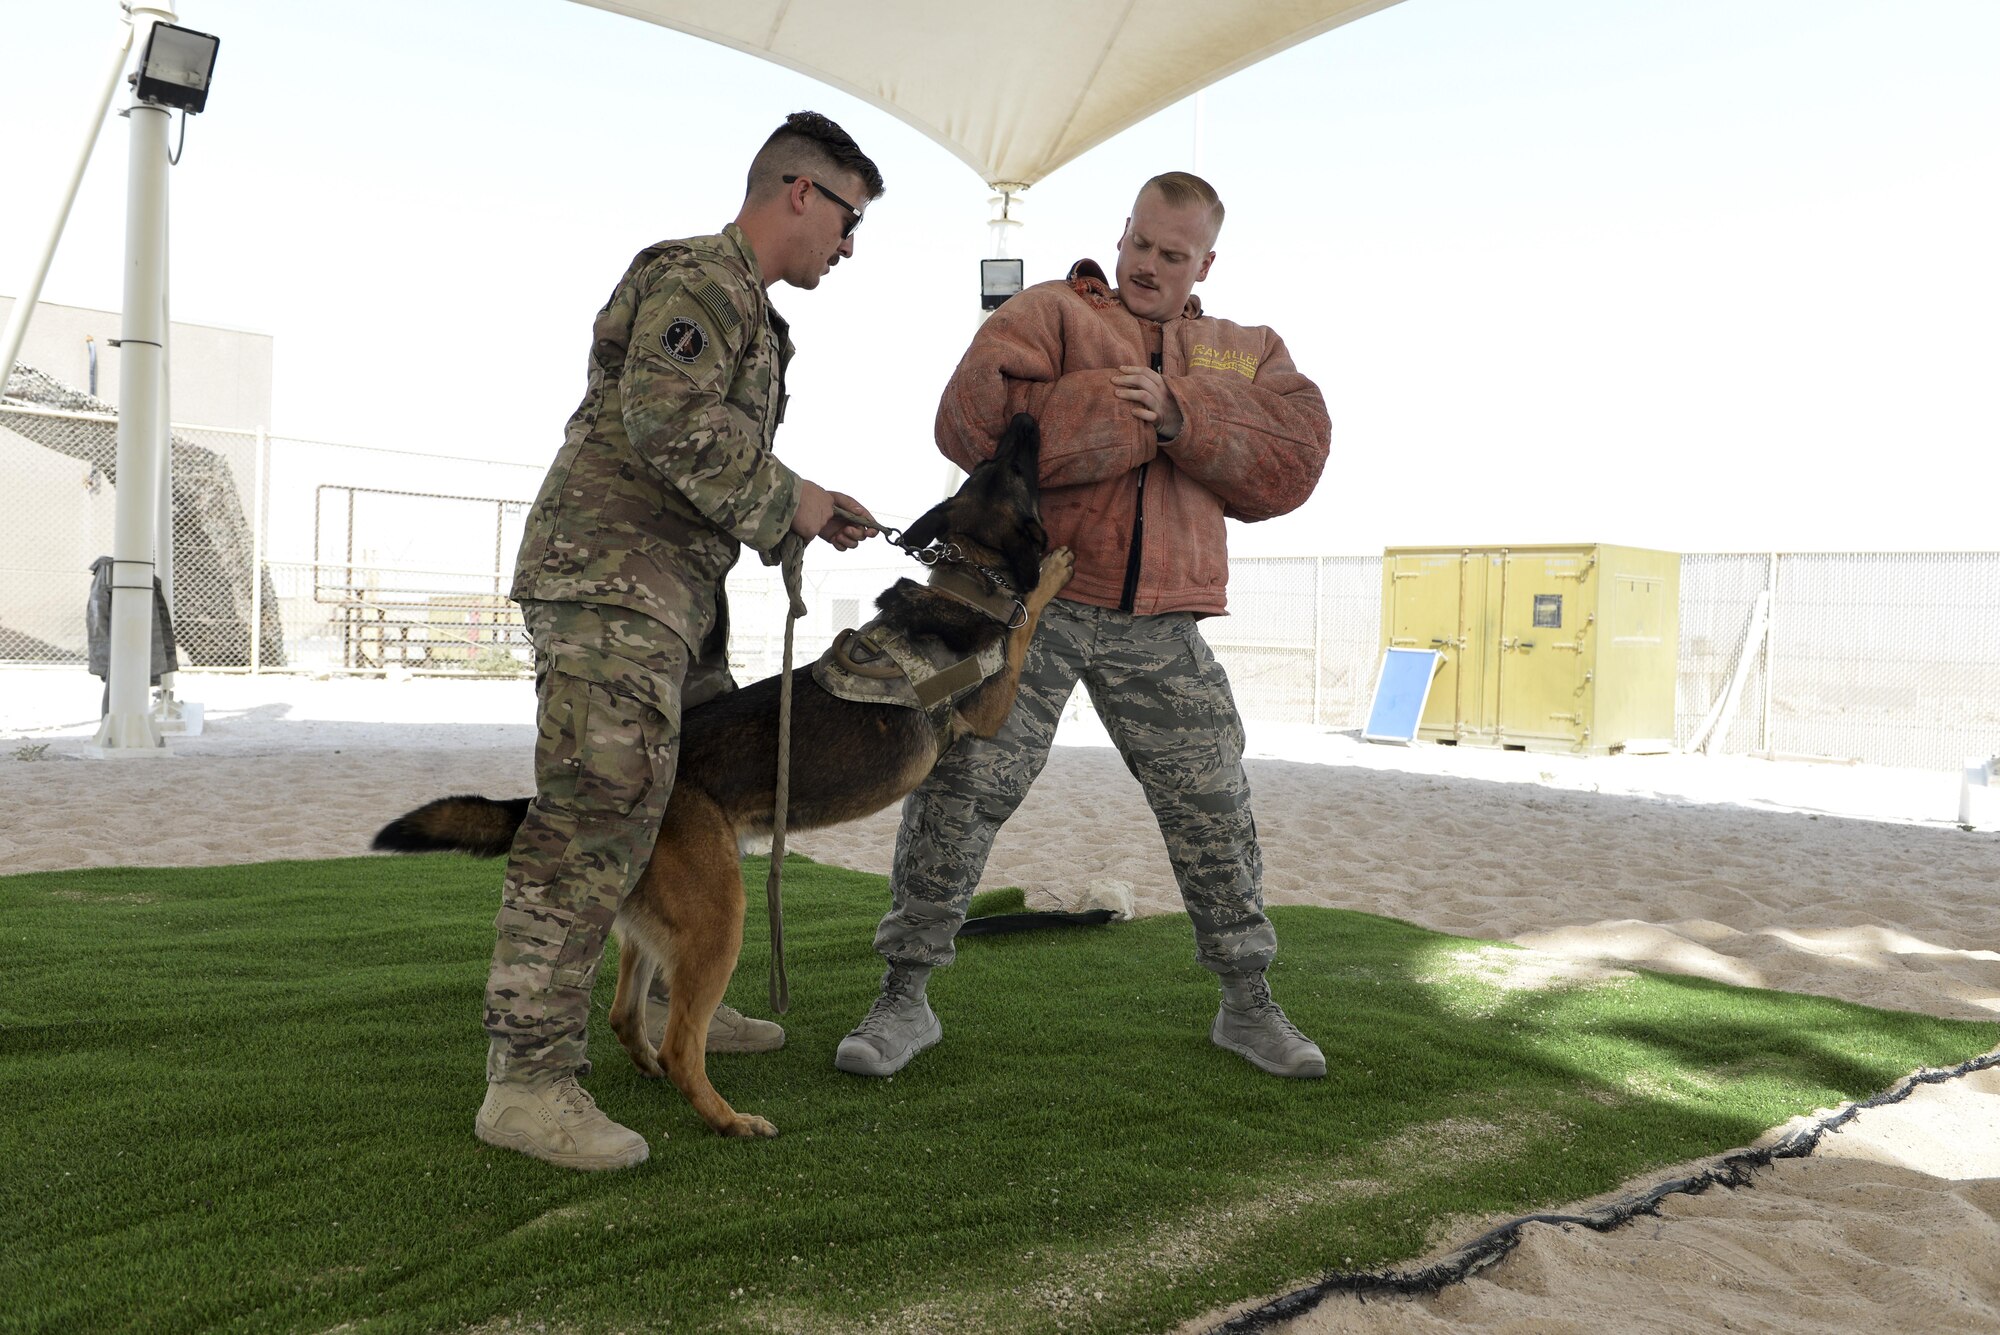 U.S. Air Force Senior Airman Louis Hurbis, military working dog handler assigned to the 379th Expeditionary Security Forces Squadron, is detained by fellow military working dog handler Staff Sgt. Brandon Stone and his military working dog Hugo, during a K-9 demonstration exercise at Al Udeid Air Base, Qatar, Aug. 17, 2017.